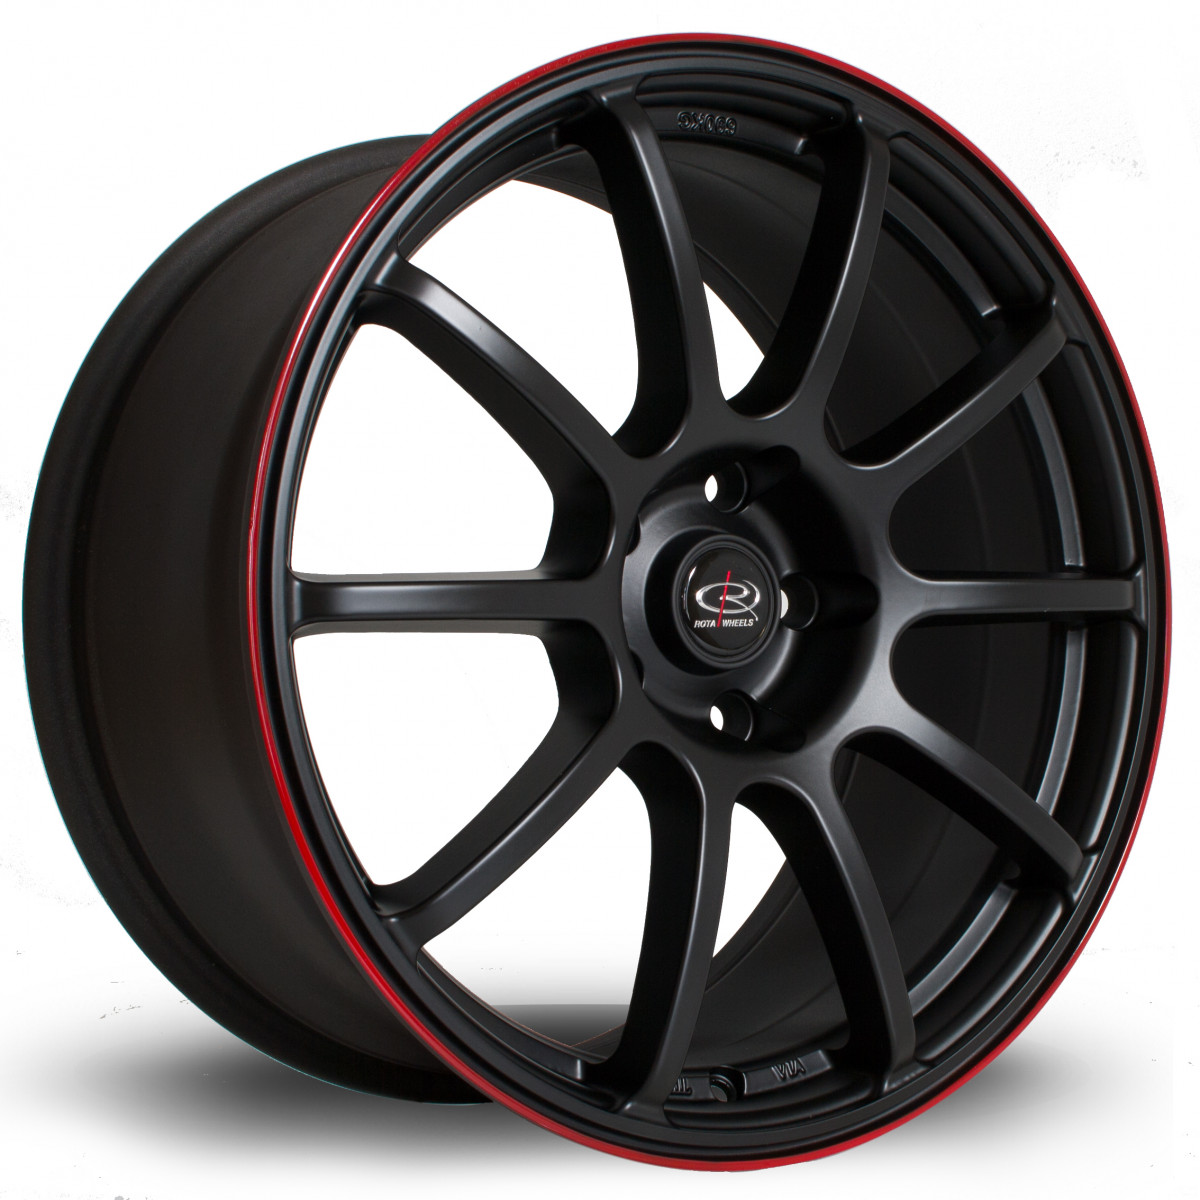 Force 18x8.5 5x100 ET48 Flat Black with Red Lip